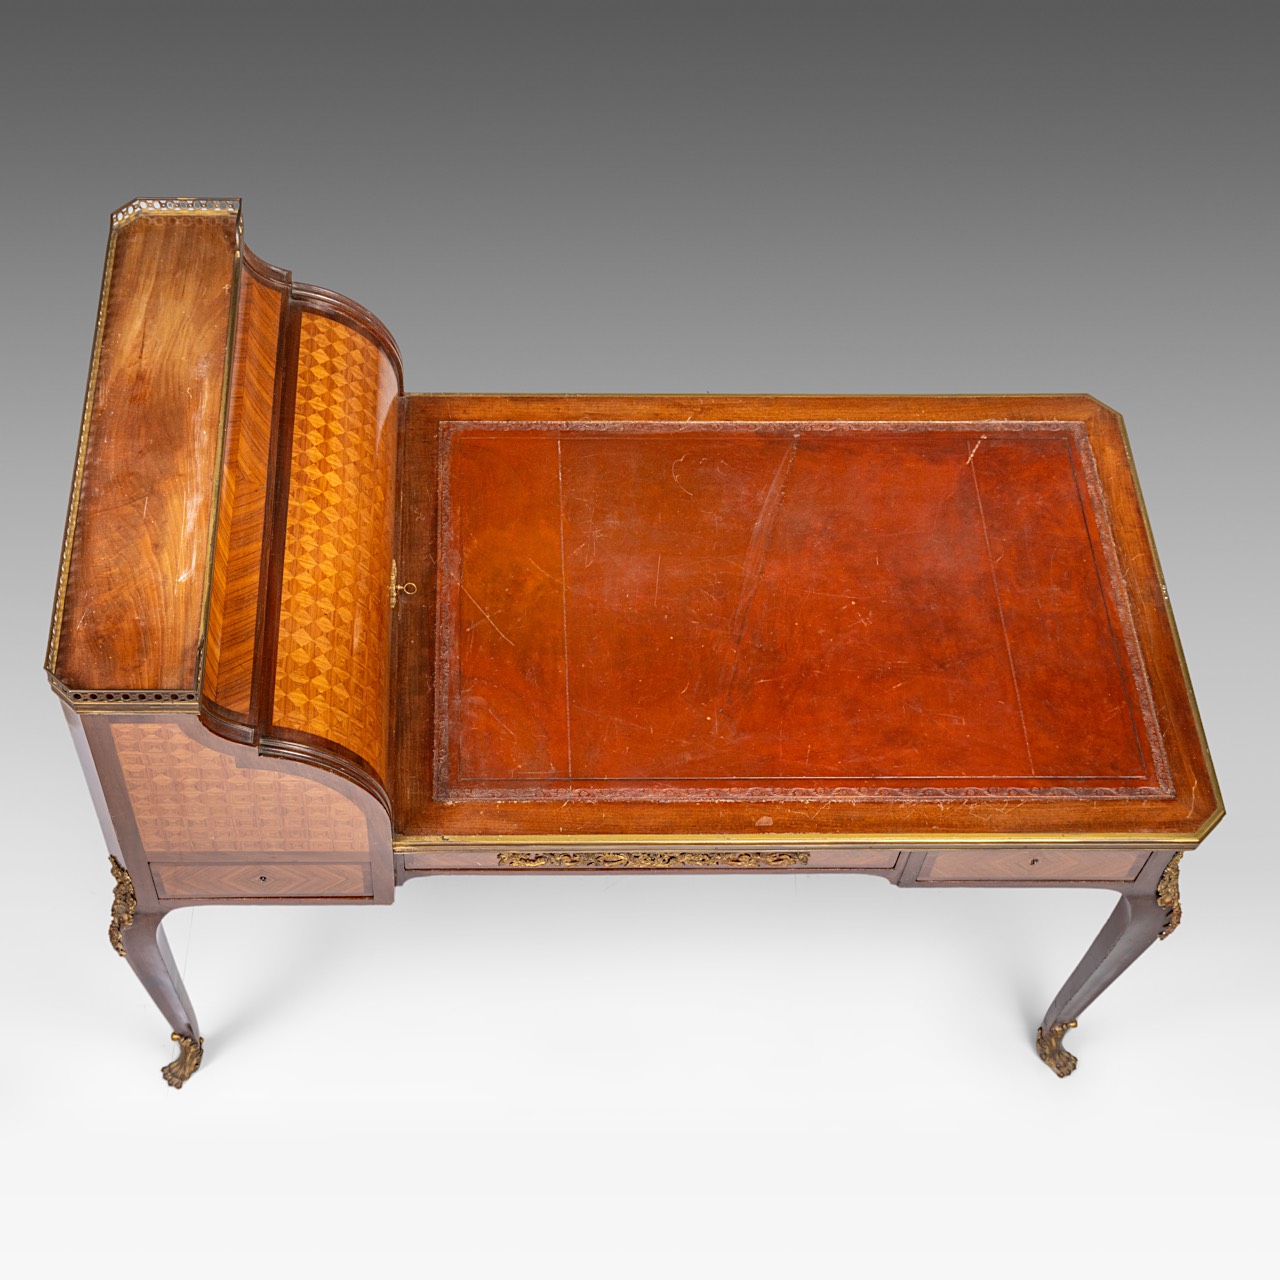 A leather-topped Transitional-style bureau plat and rolltop desk with parquetry and gilt bronze moun - Image 9 of 9